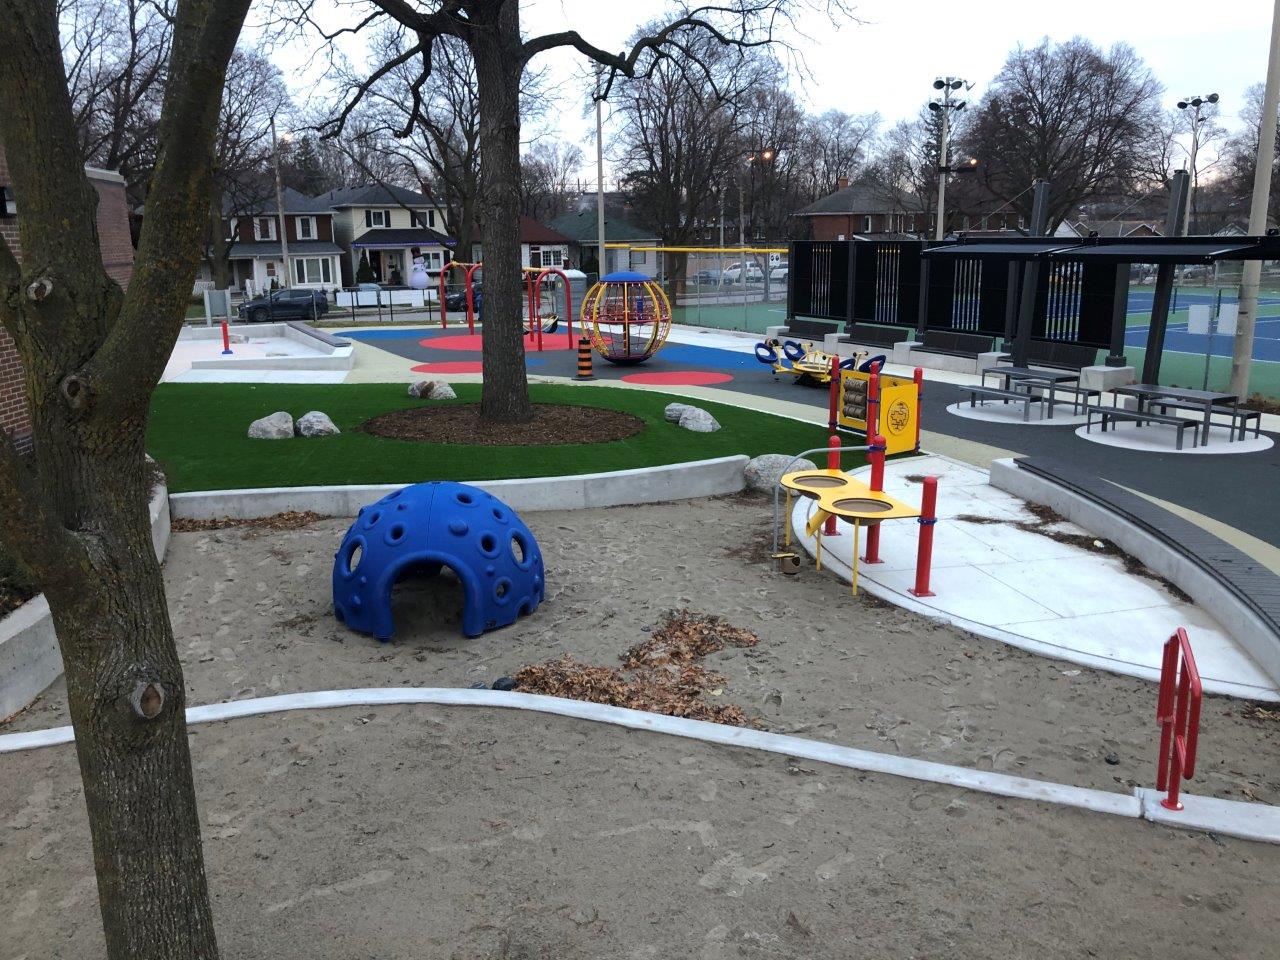 New playground at Trace Manes park. Image shows a view of park looking east and shows the sand play area with Cozy Dome, artificial turf area, with swings and spinning climber in the distance.